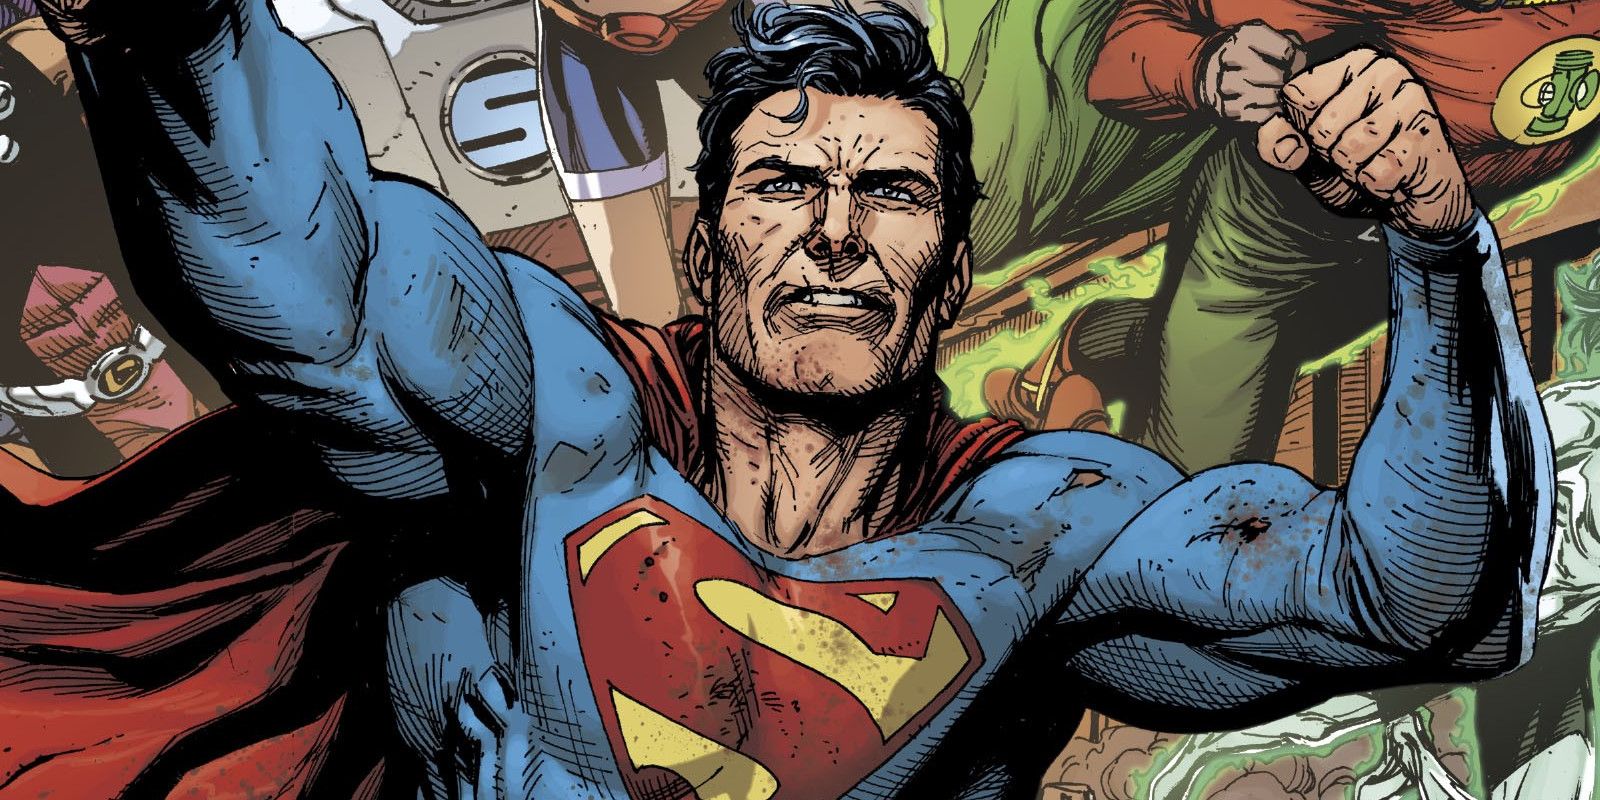 Superman flying with his fists closed and a stern expression